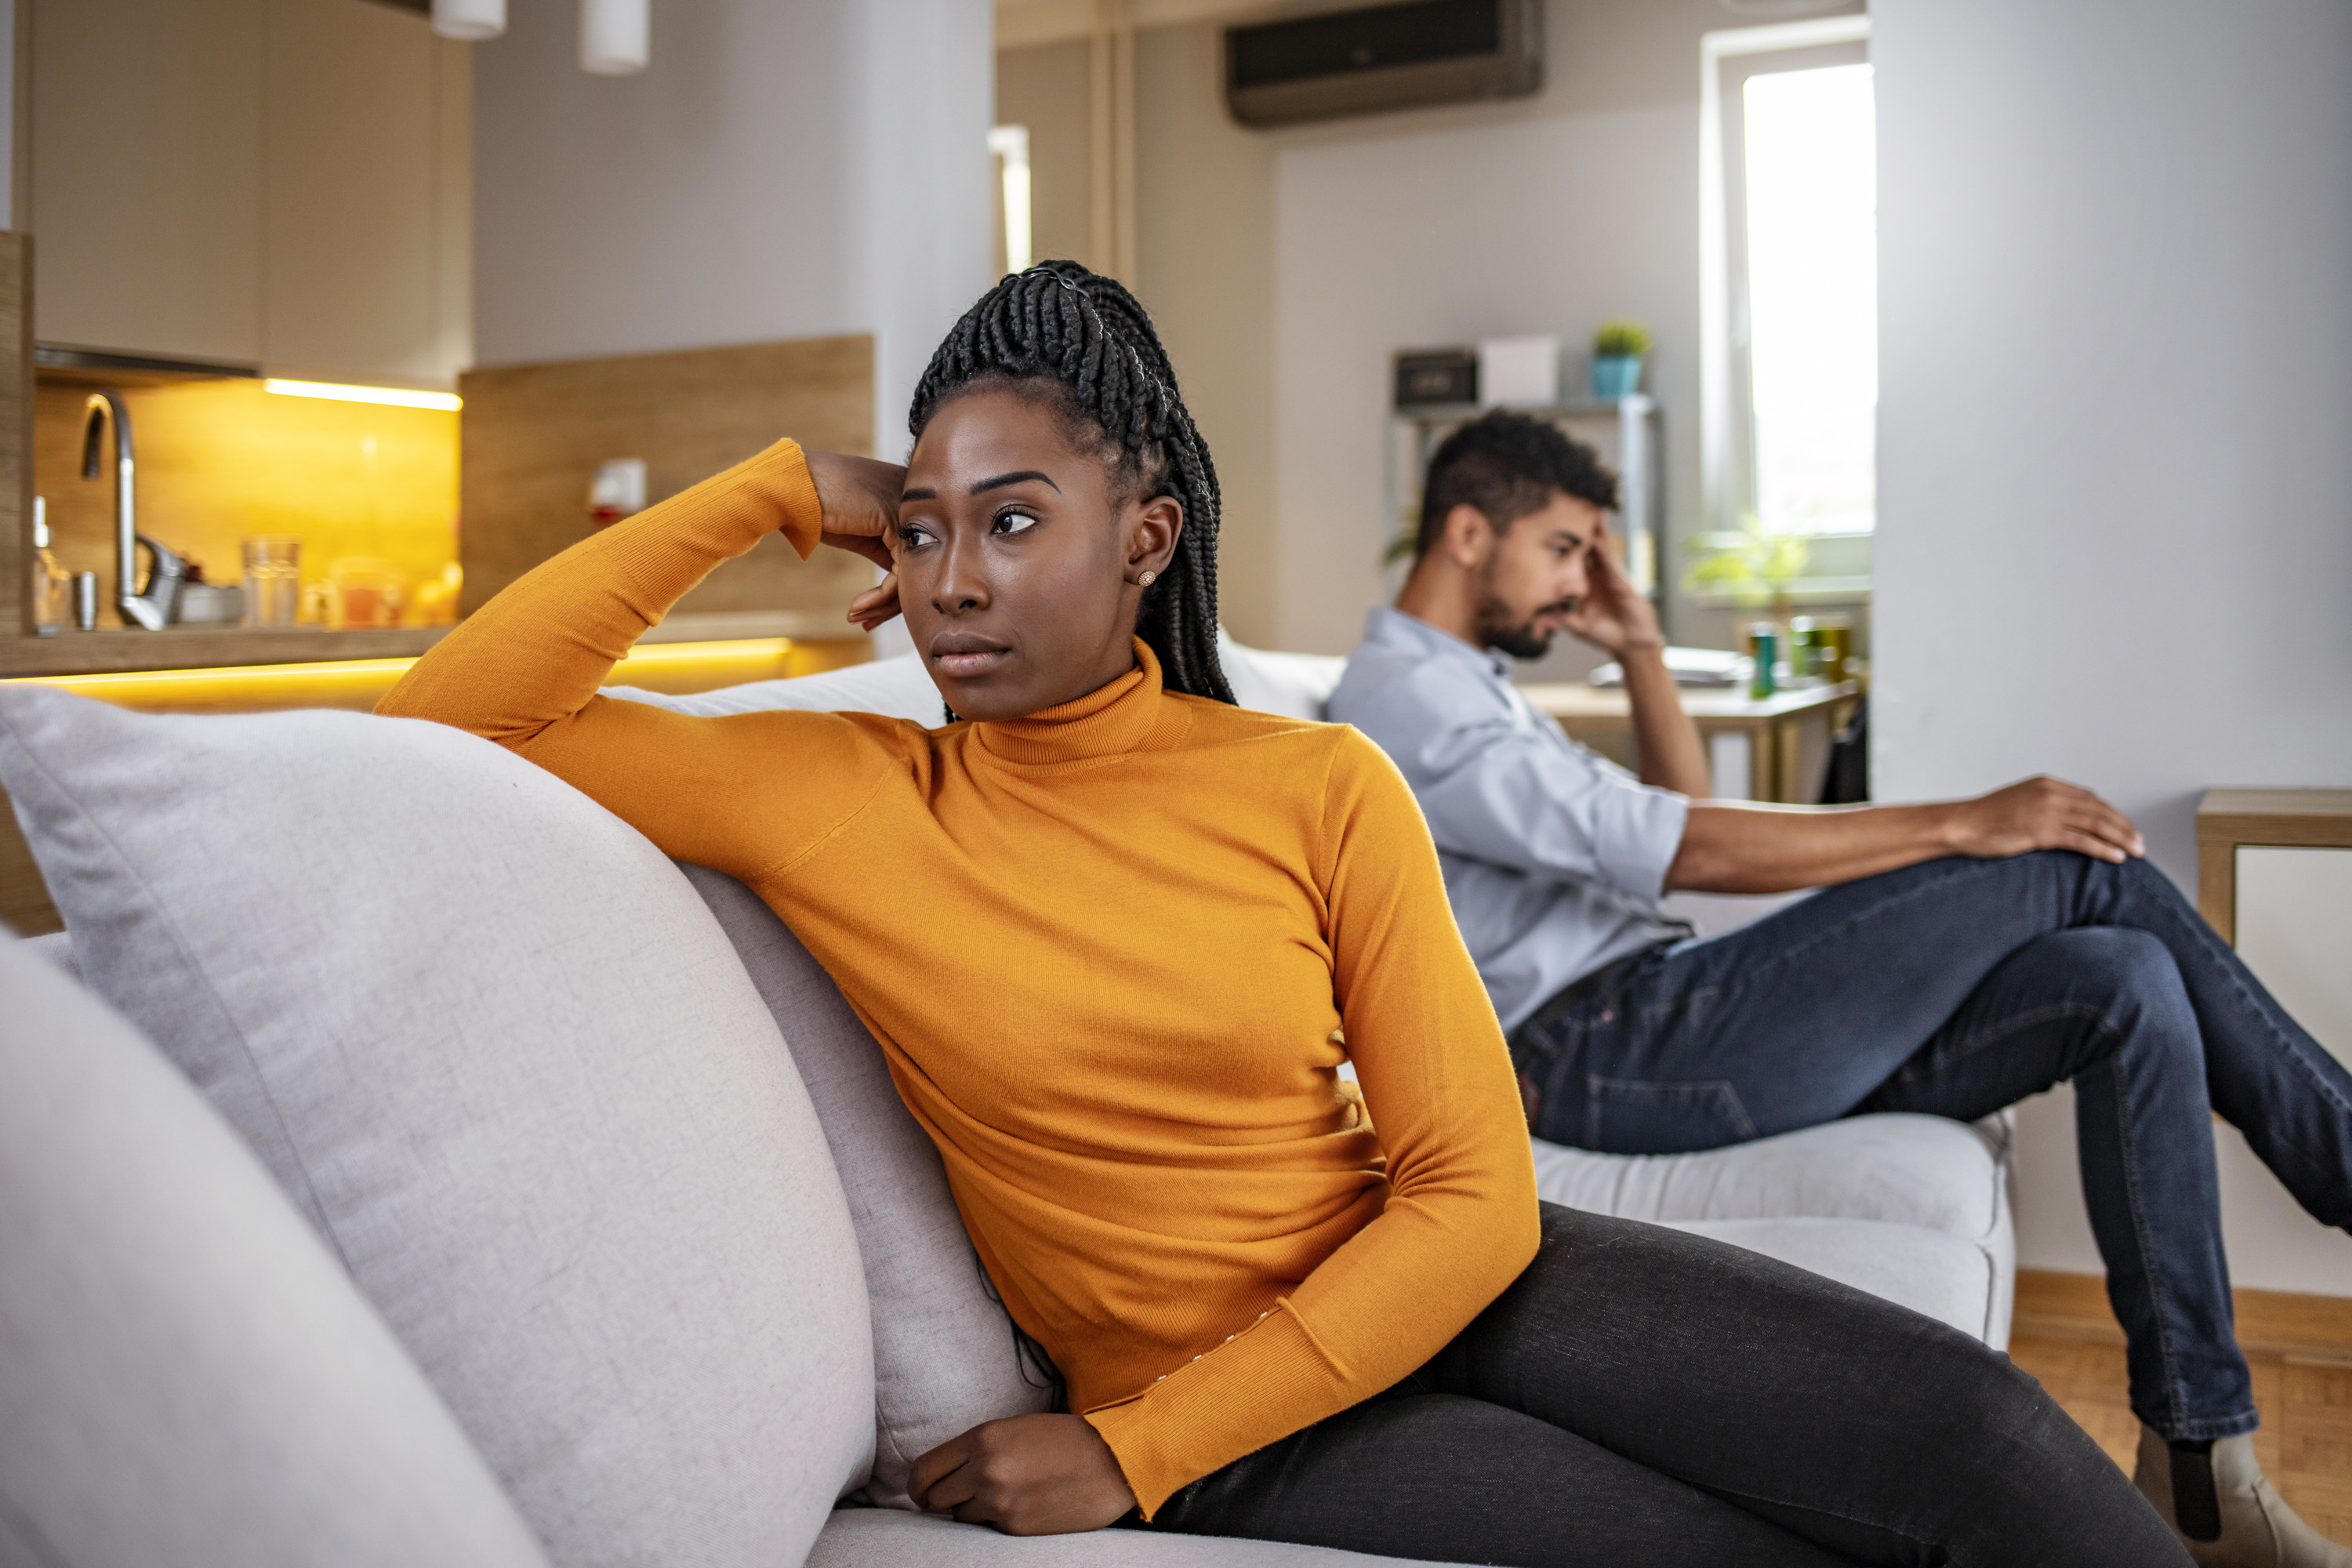 A woman faces away from her partner with a sad look on her face while sitting on the couch